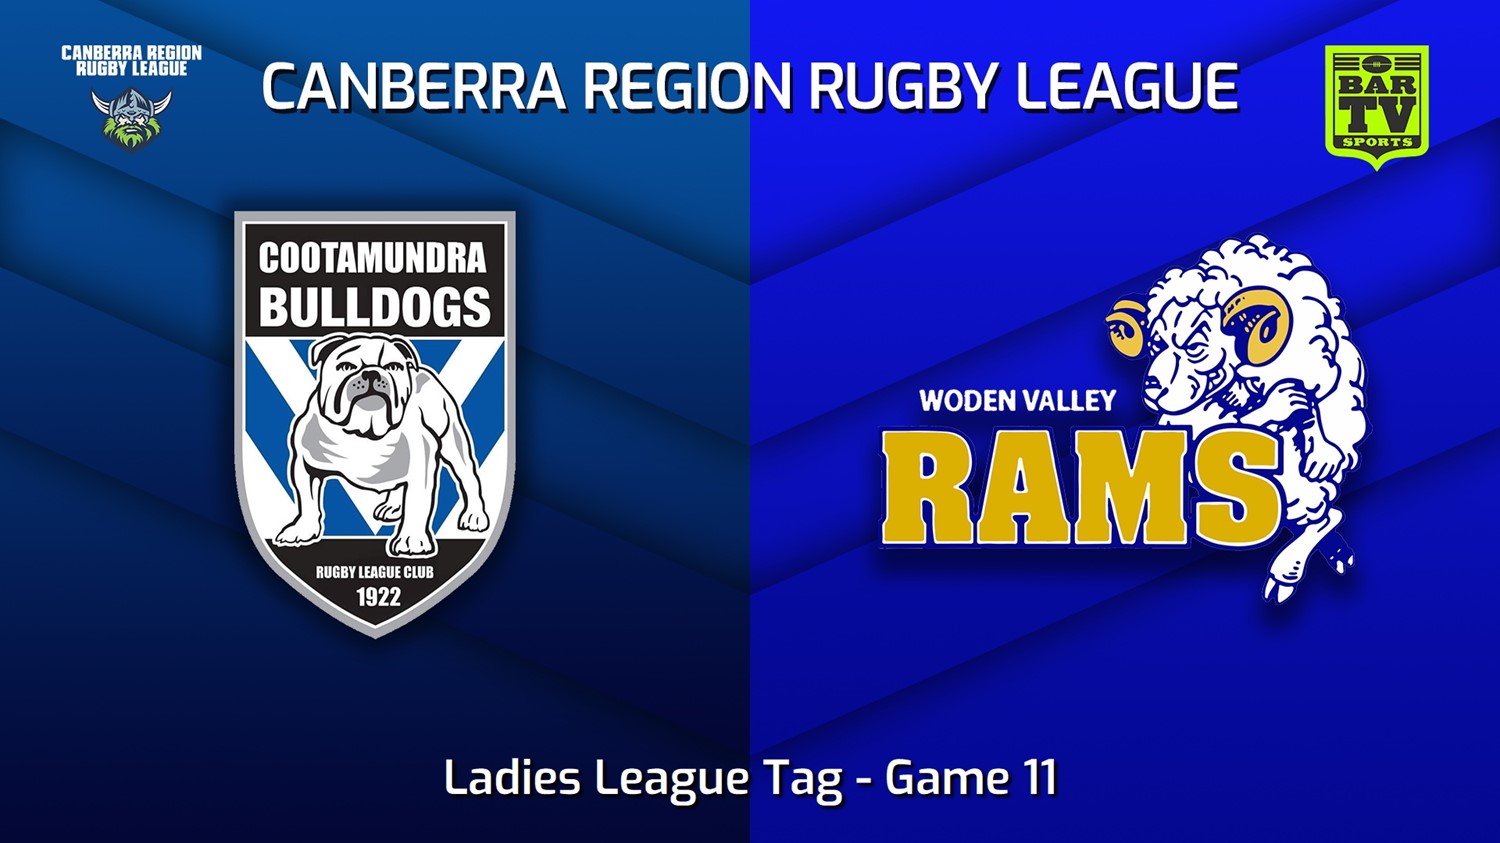 230401-Canberra Game 11 - Ladies League Tag - Cootamundra Bulldogs v Woden Valley Rams Minigame Slate Image